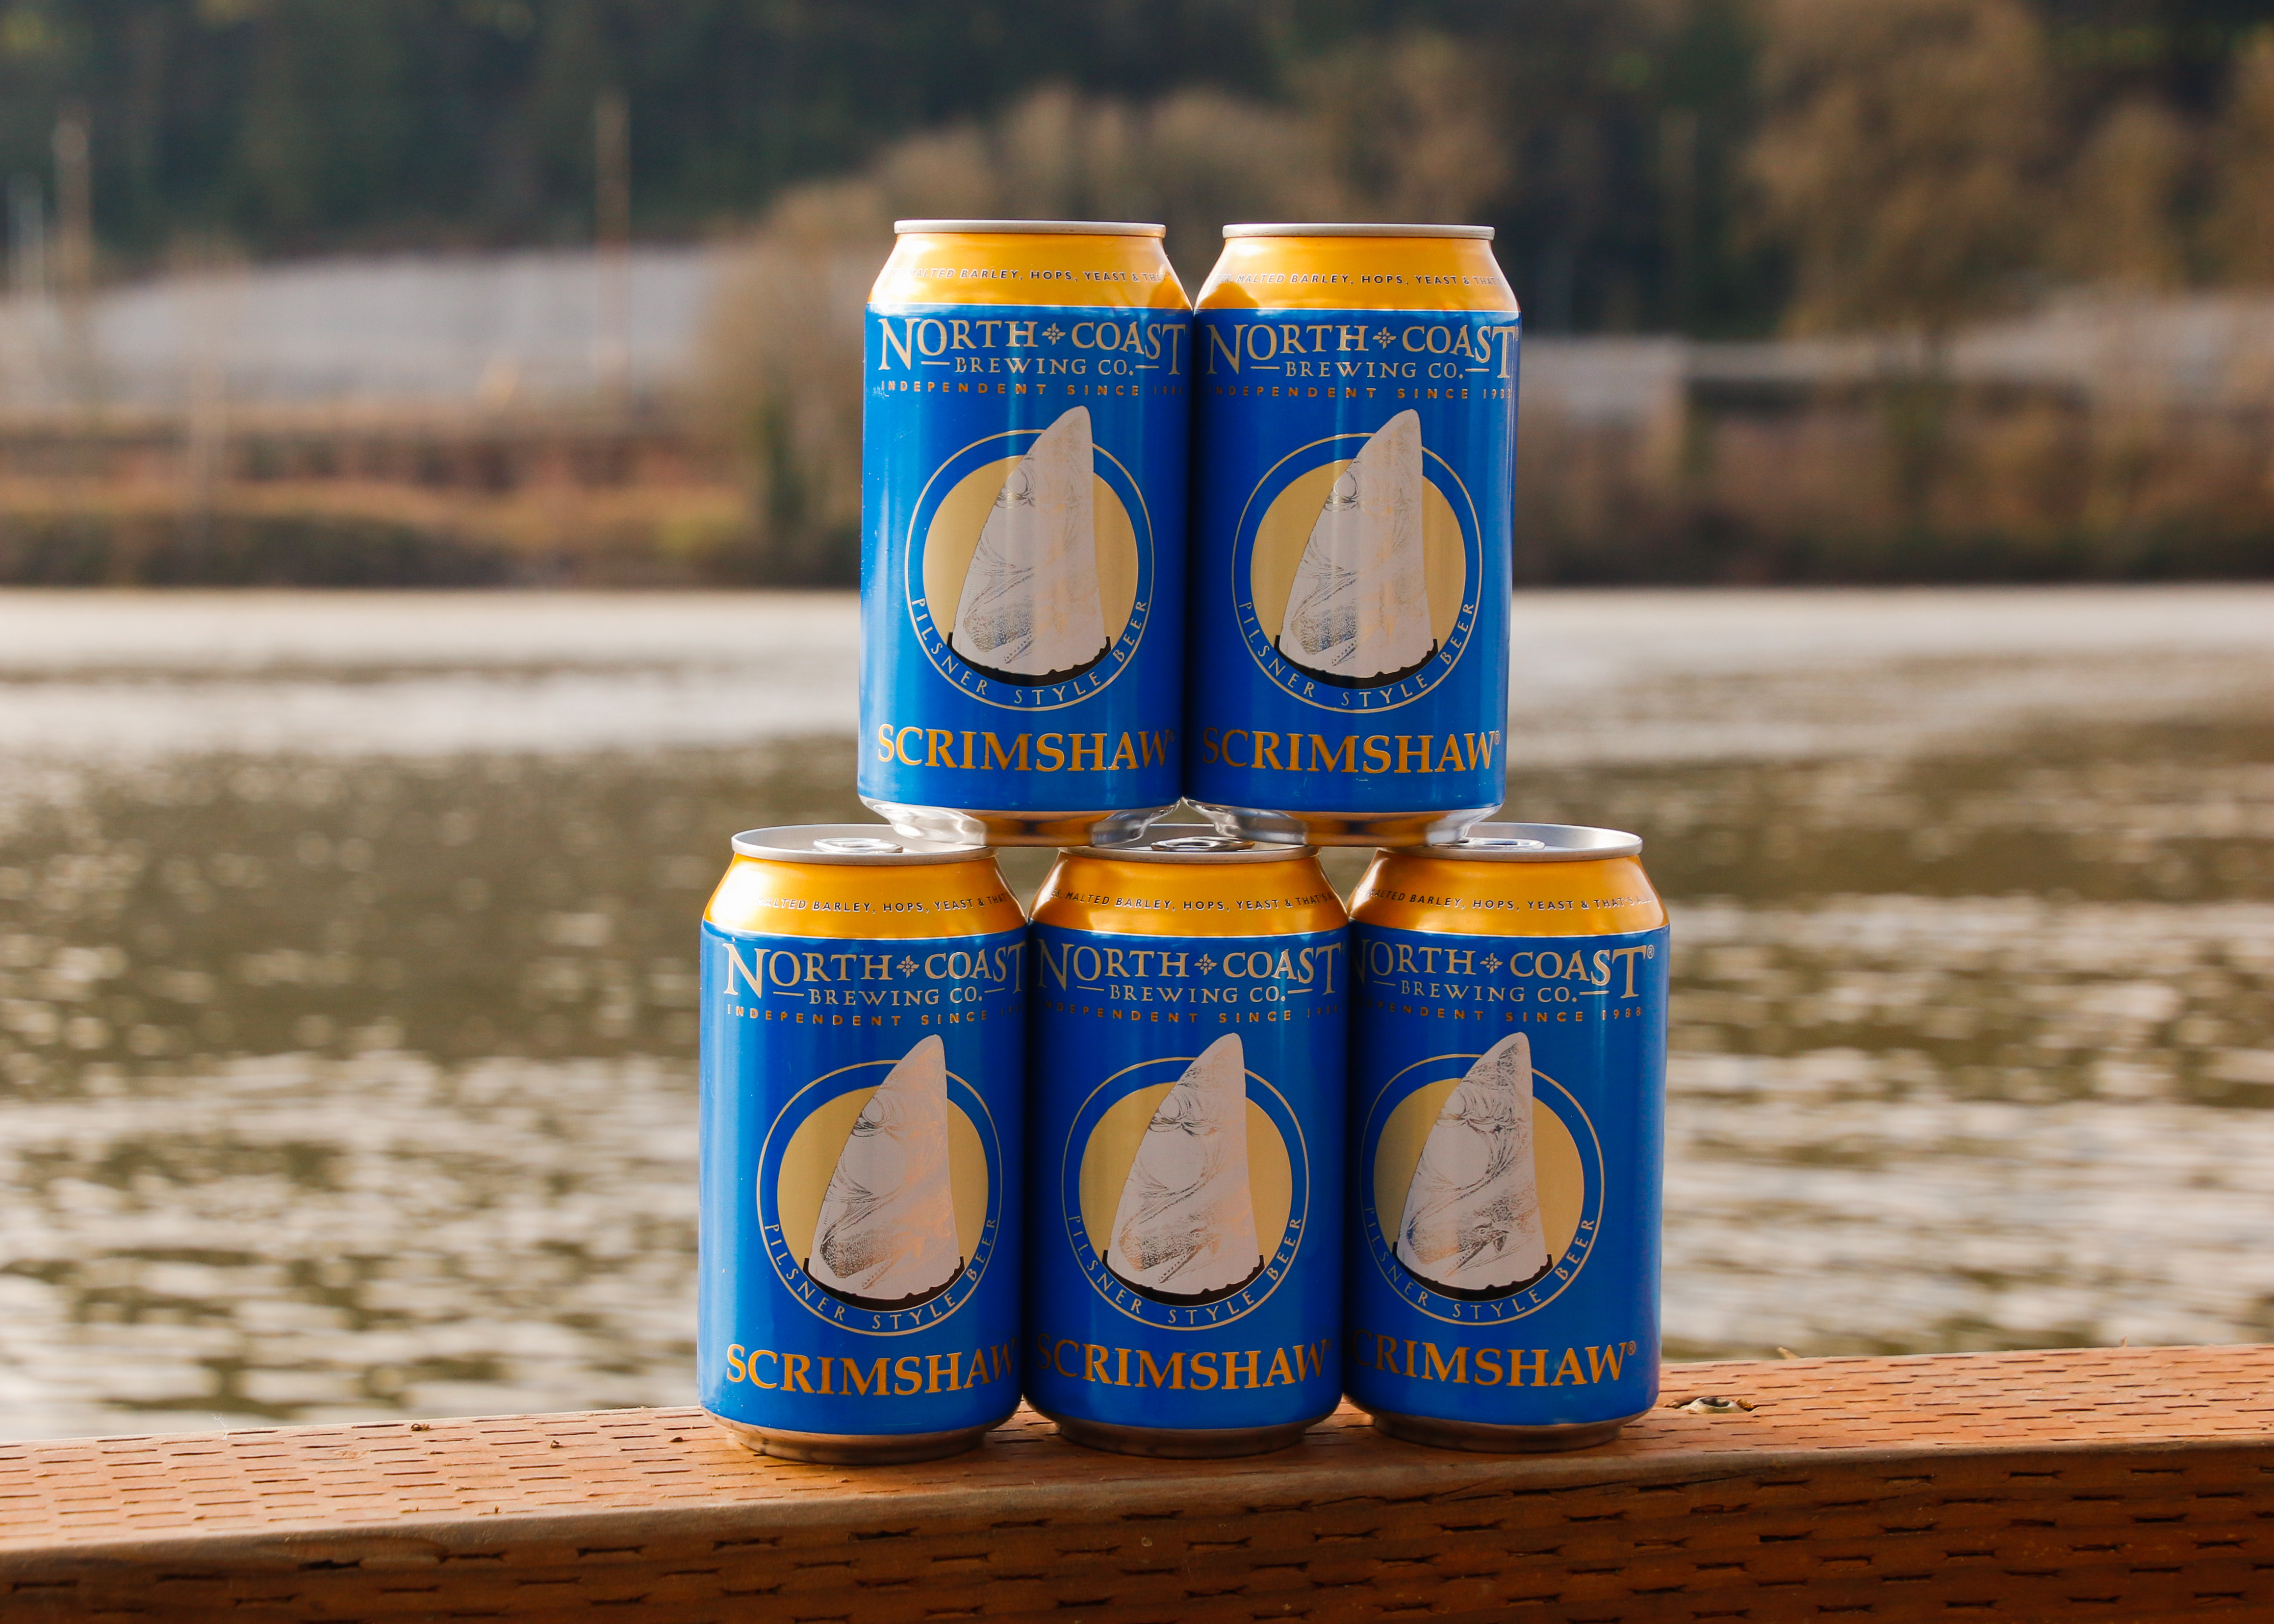 image of the new Scrimshaw cans courtesy of North Coast Brewing Company